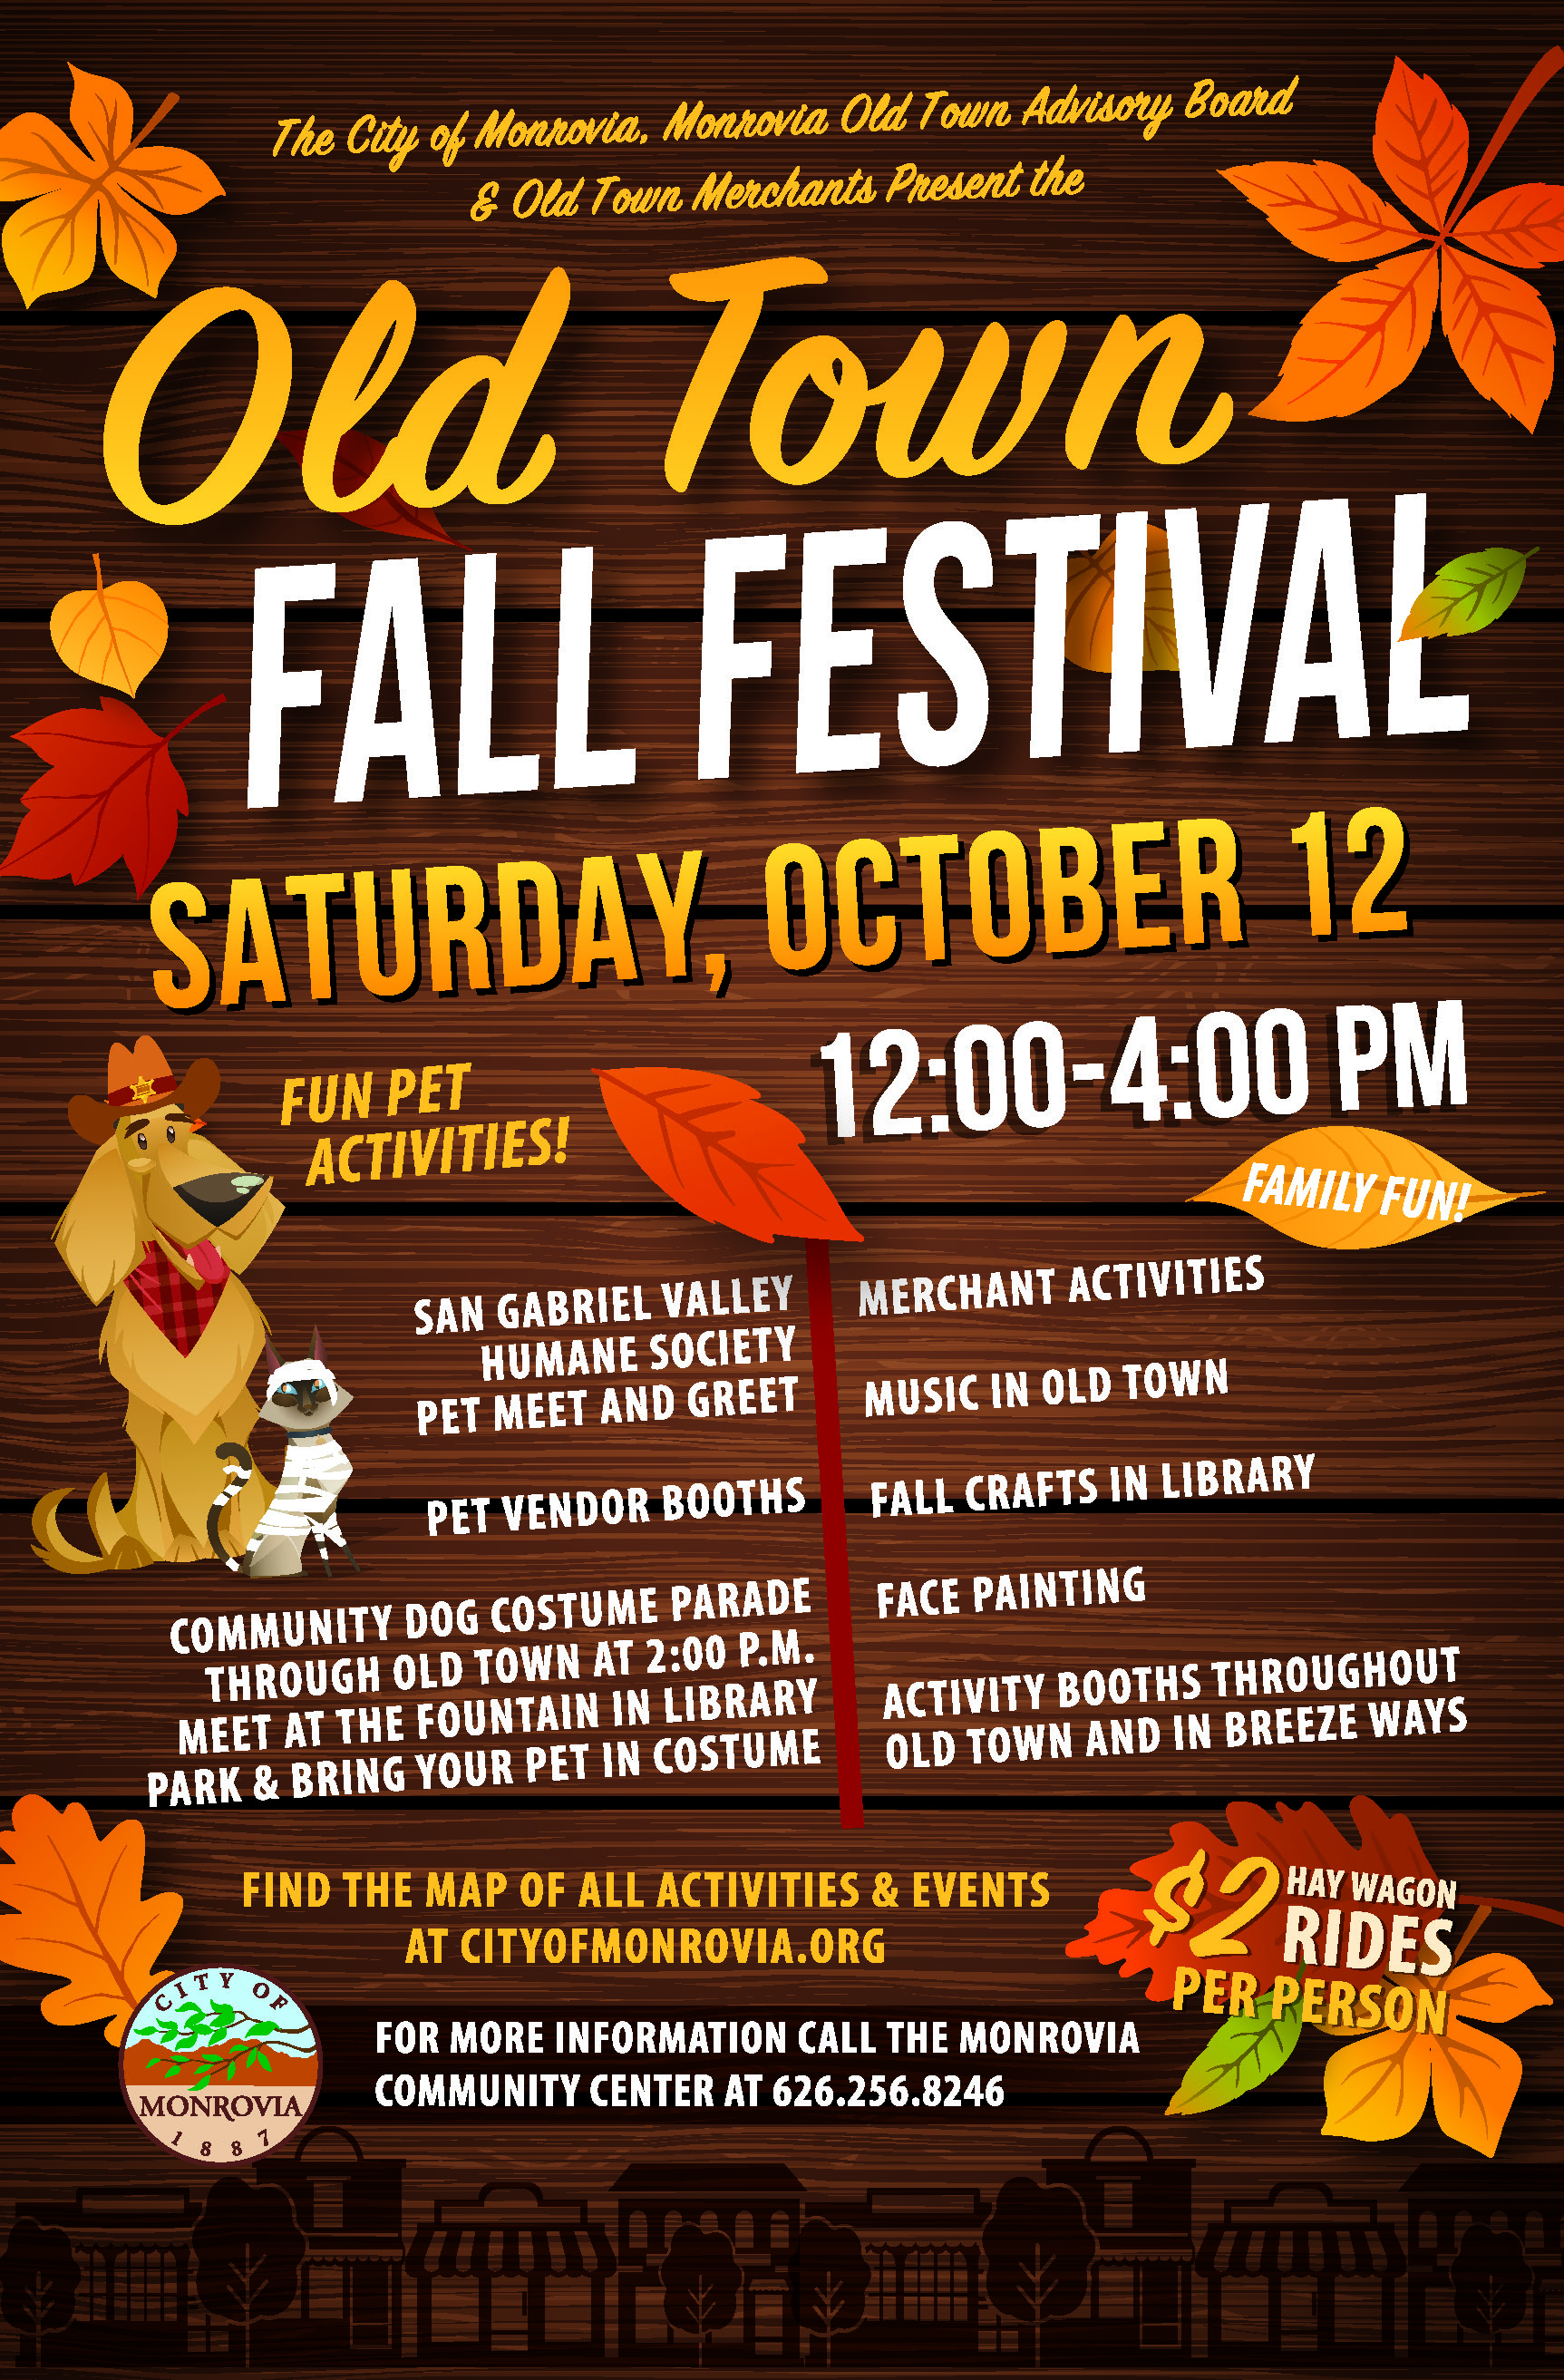 Old Town Fall Festival Old Town Monrovia